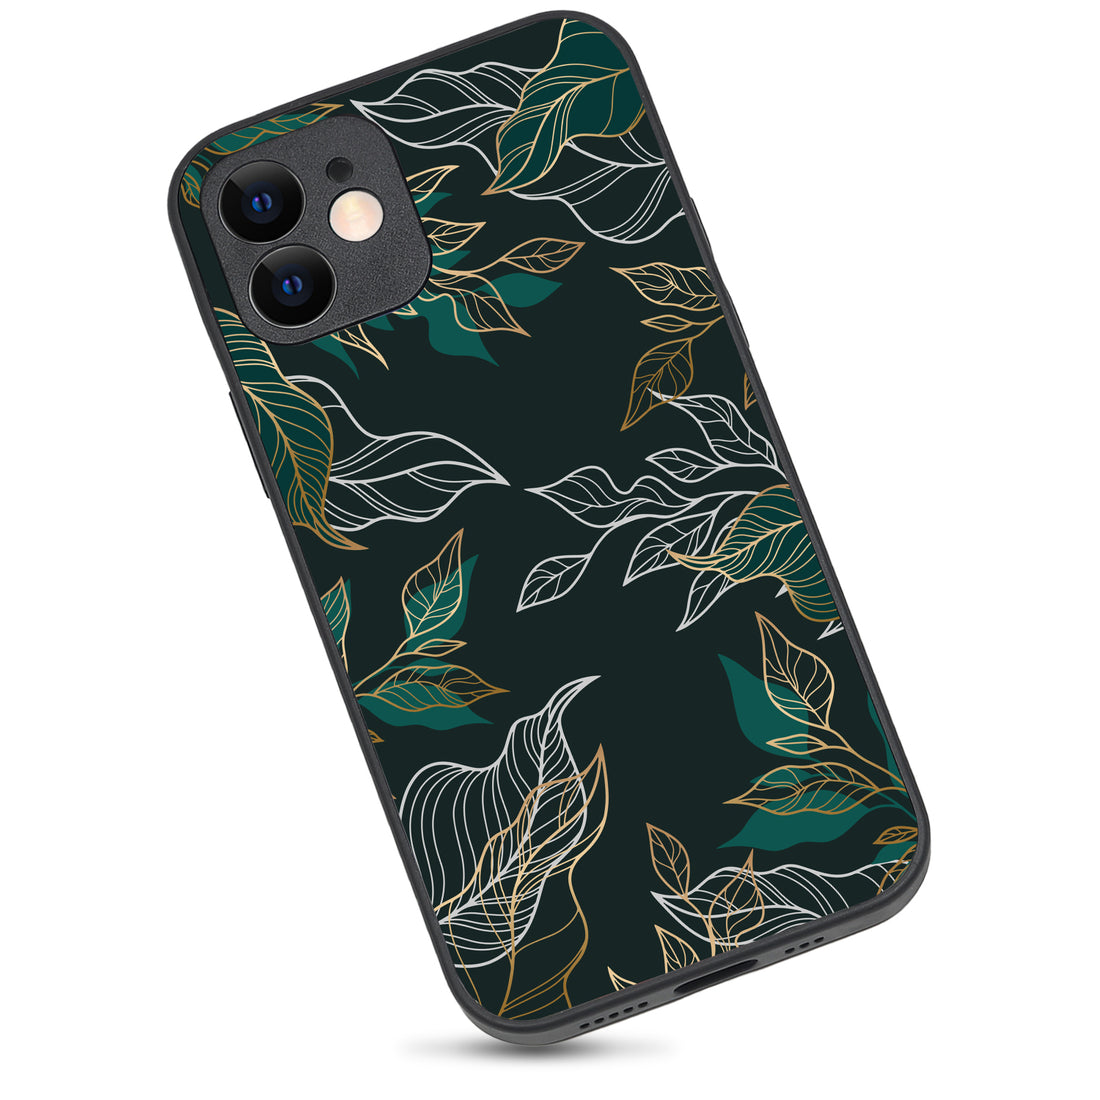 Green Floral iPhone 12 Case